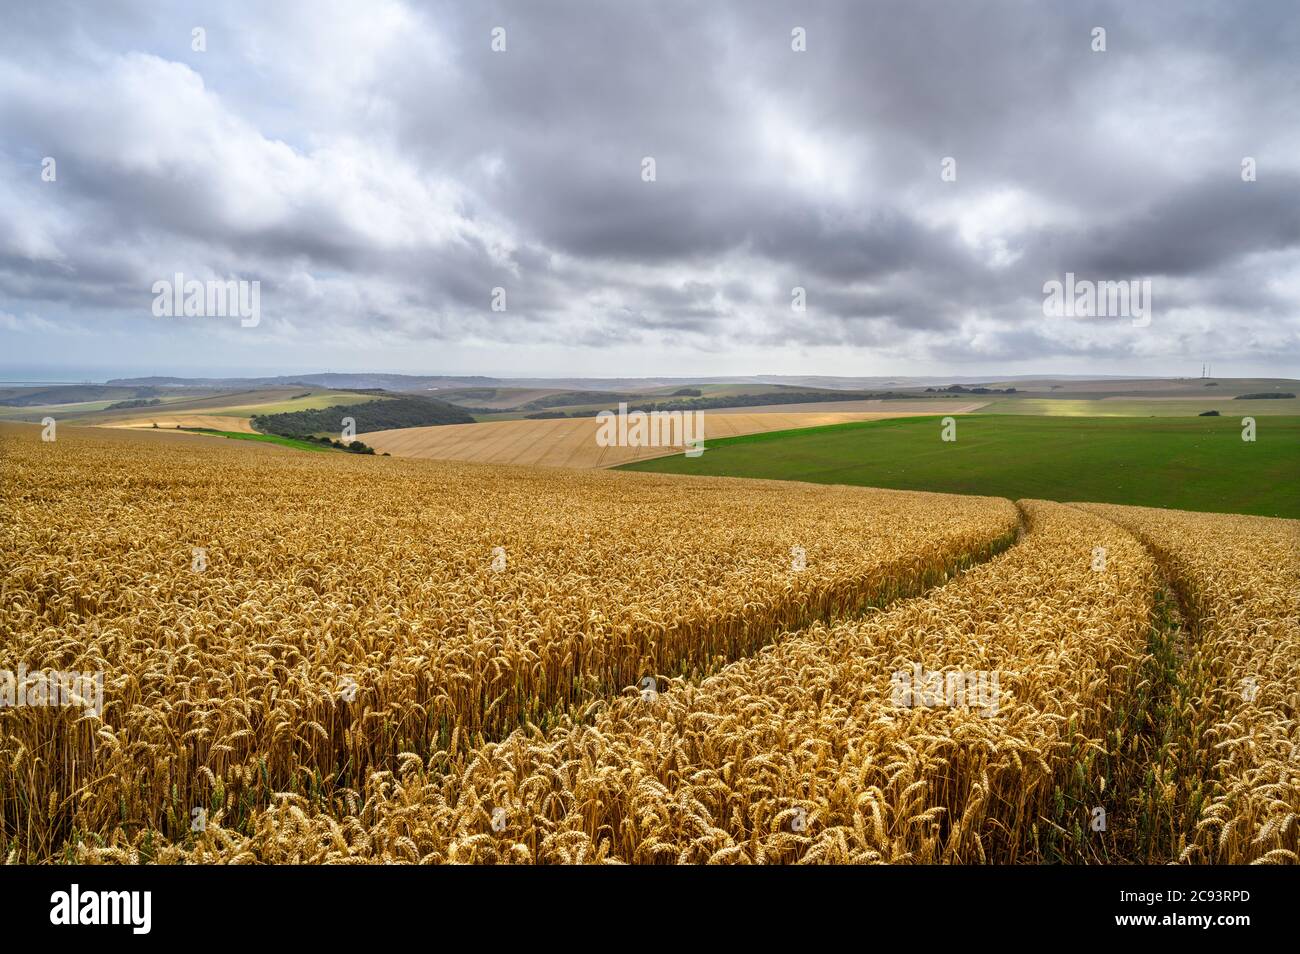 South Downs National Park, Sussex, England, UK. Wheat field near Firle Beacon and Newhaven with views to the south coast. Stock Photo